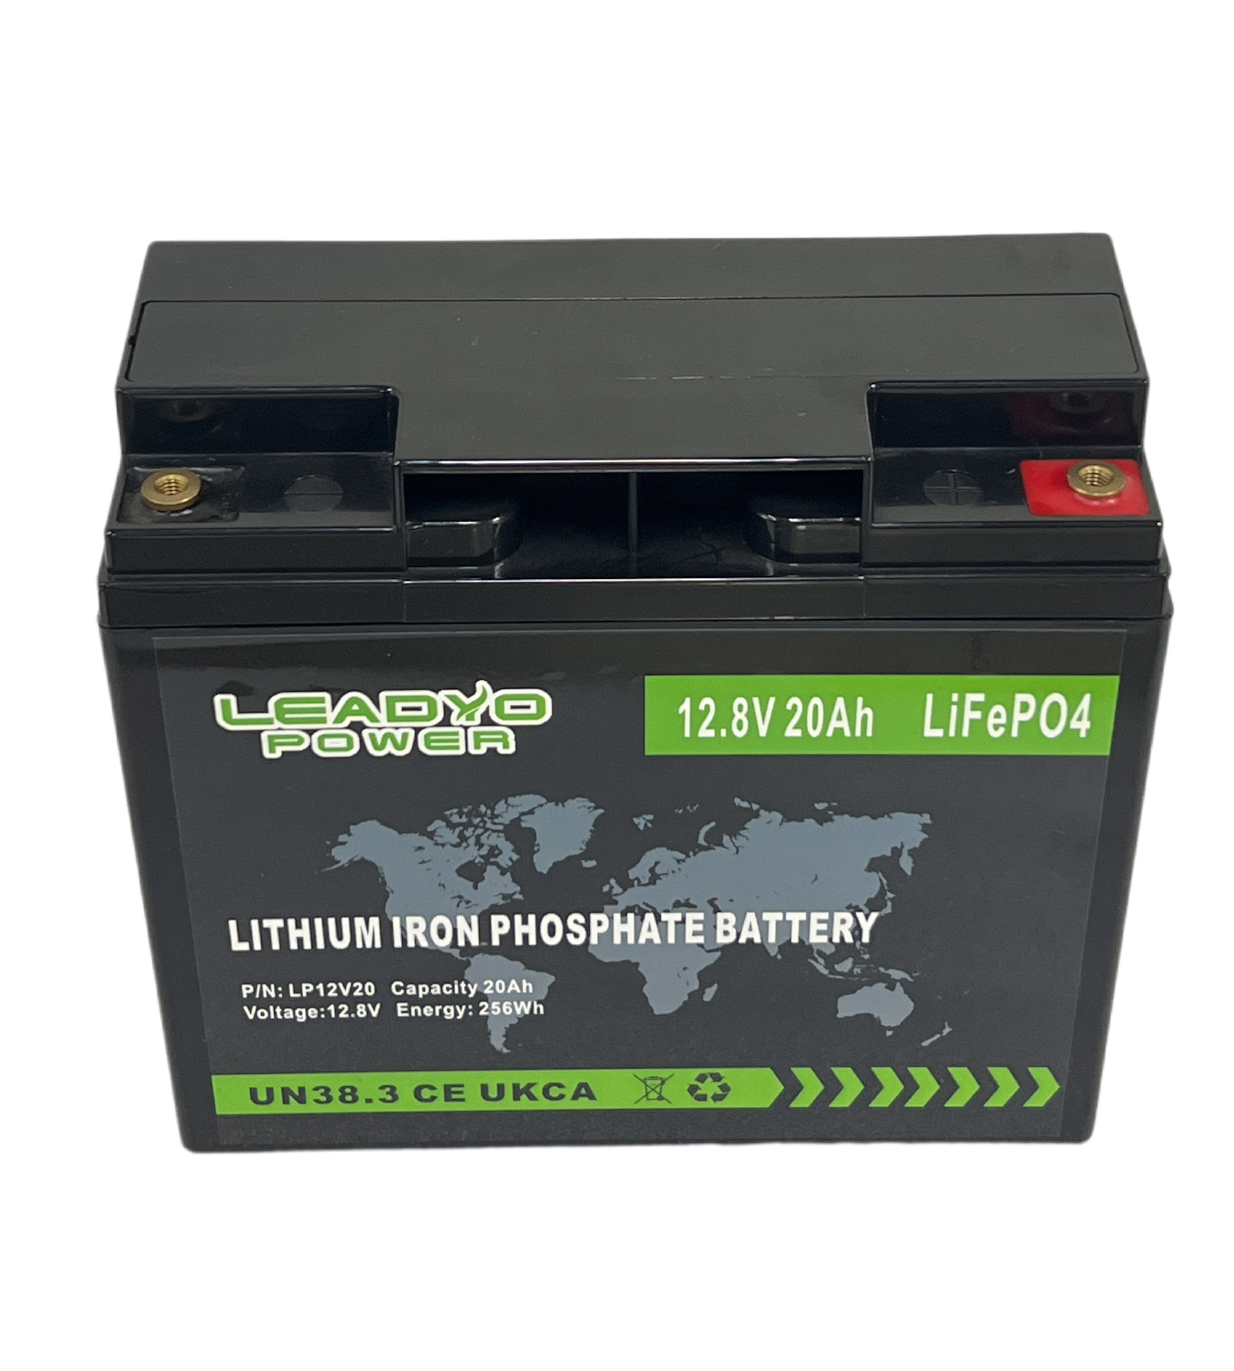 Lifepo4 Battery Solutions for Business Applications: The Reliable Choice from Leadyo Power